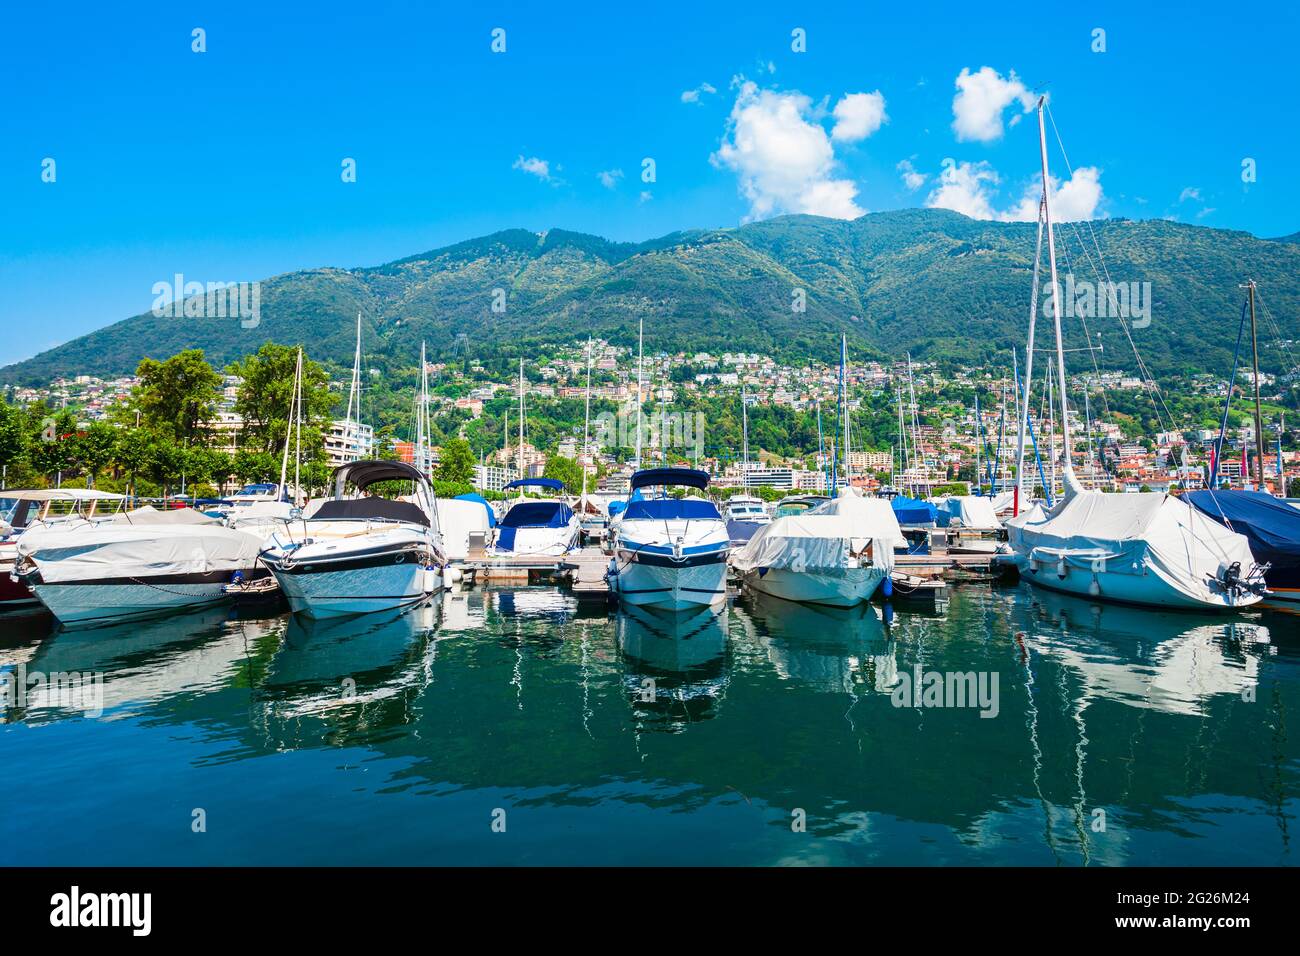 Locarno port with yachts and boats. Locarno is a town located on Lake  Maggiore in Ticino canton of Switzerland Stock Photo - Alamy